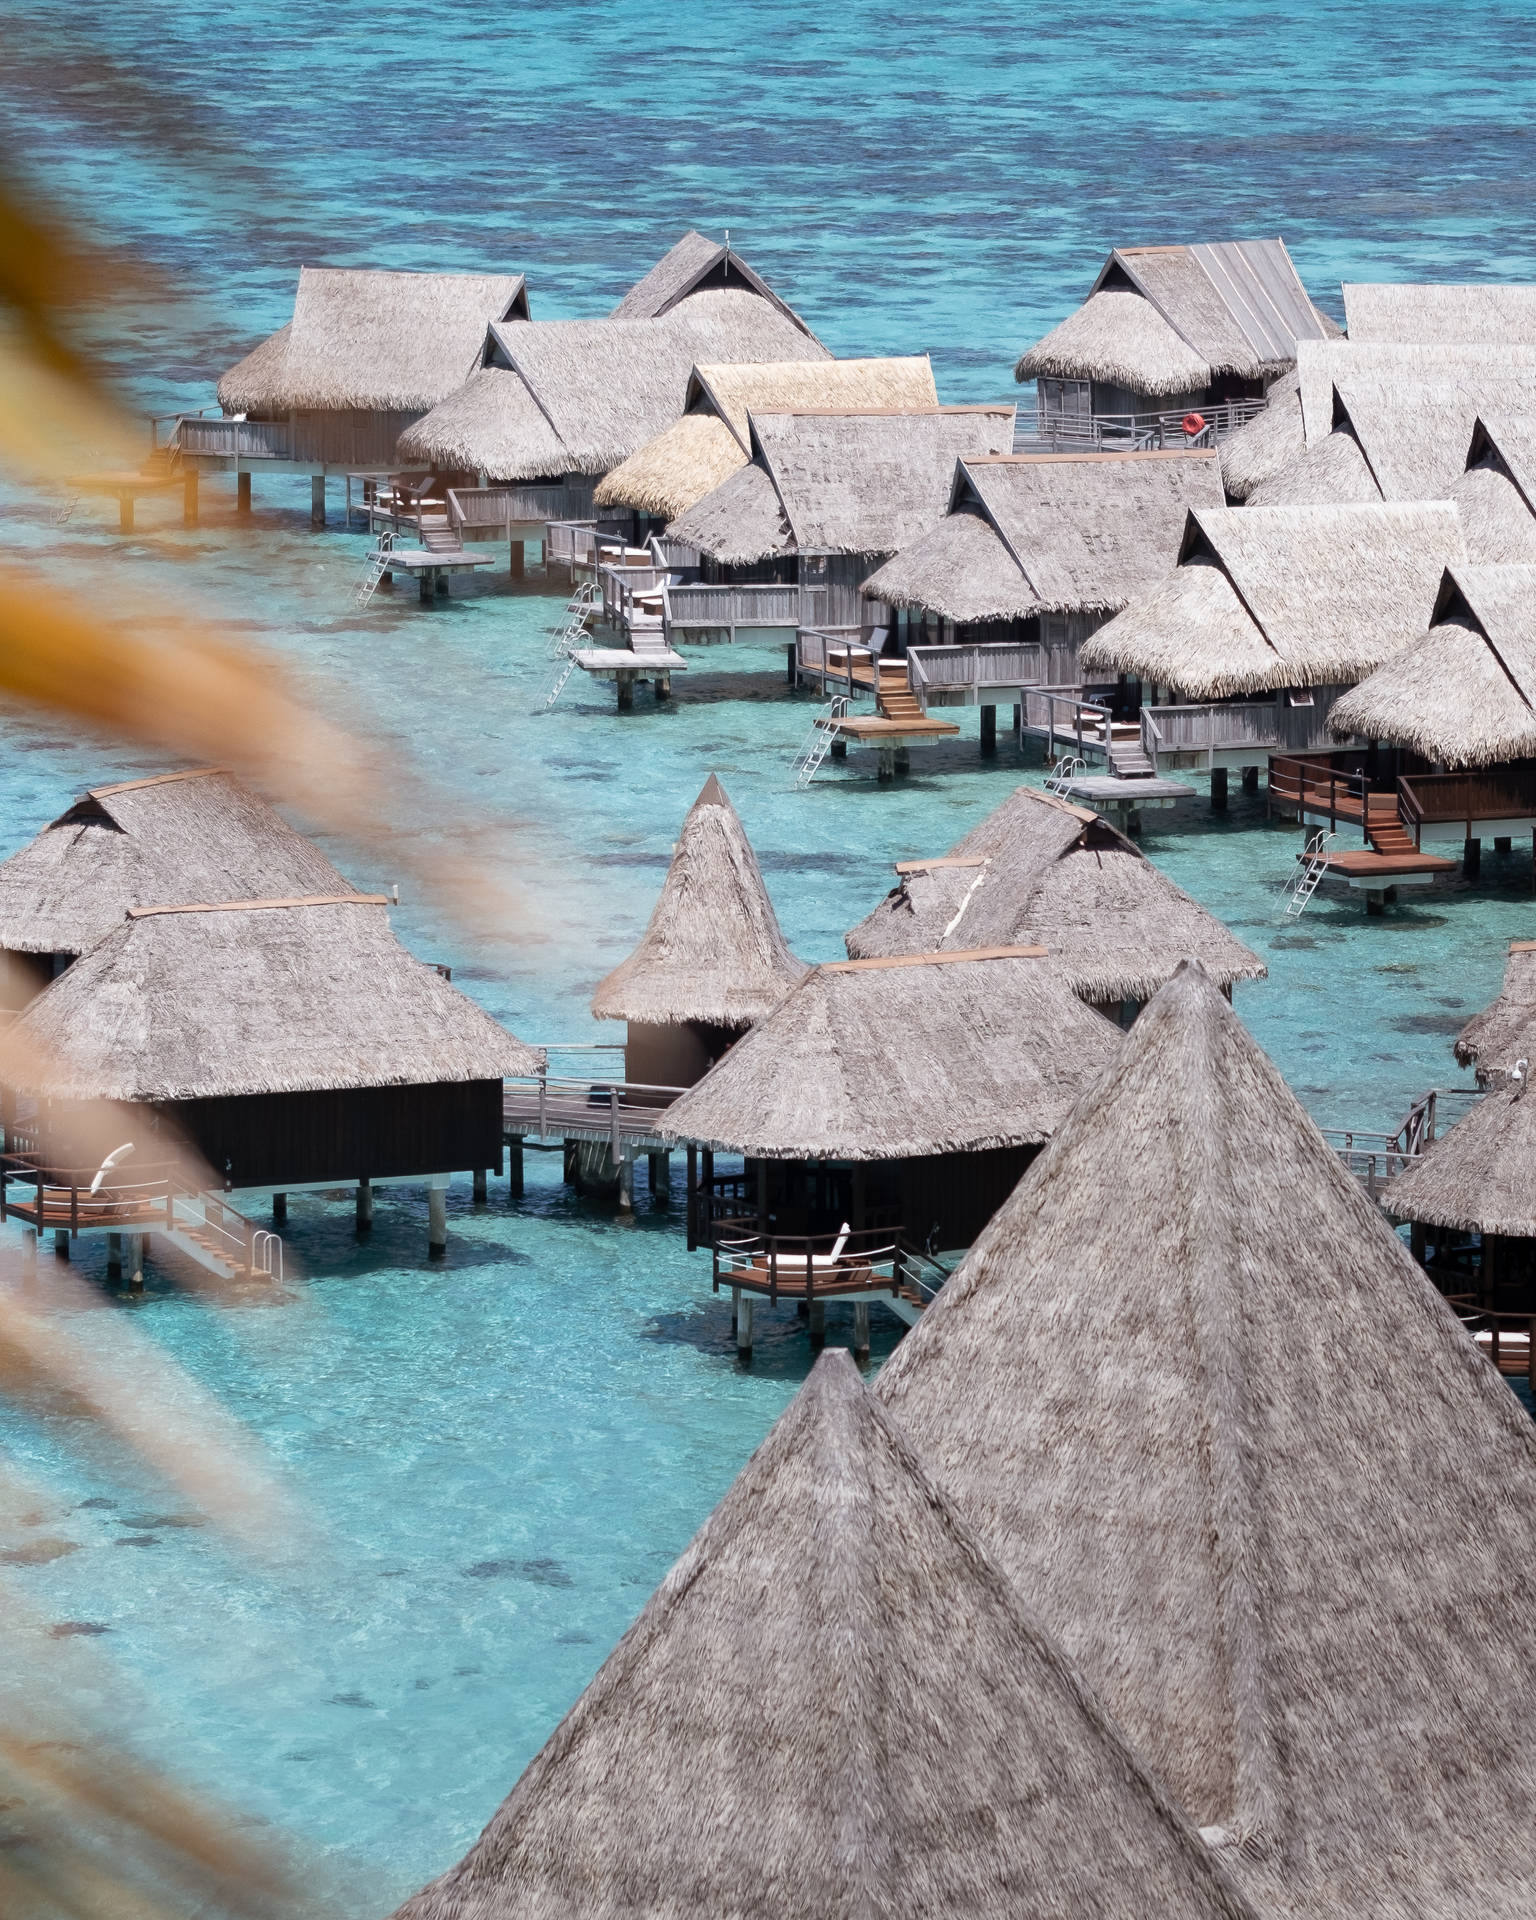 French Polynesia Houses In Ocean